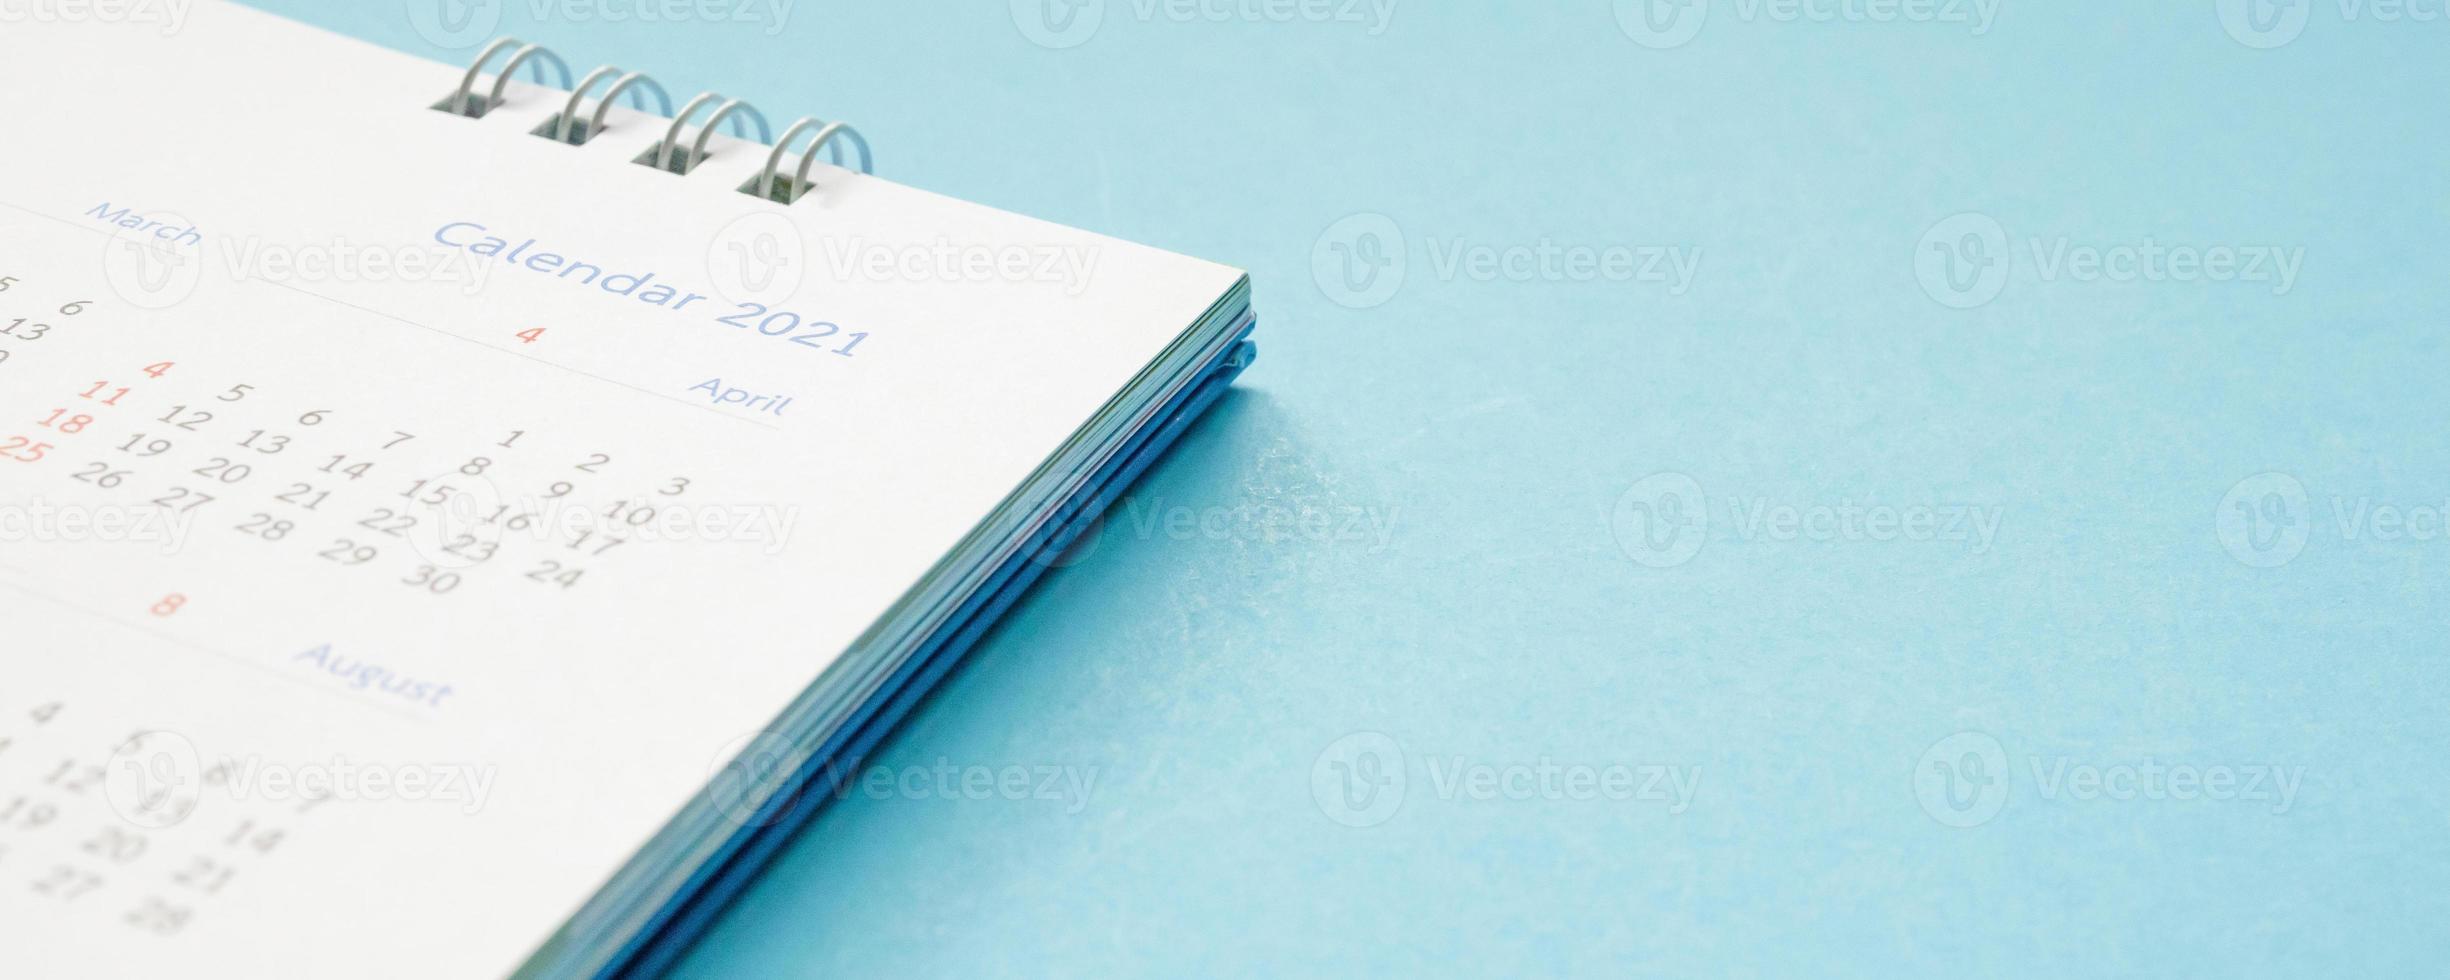 2021 calendar page on blue background business planning appointment meeting concept photo